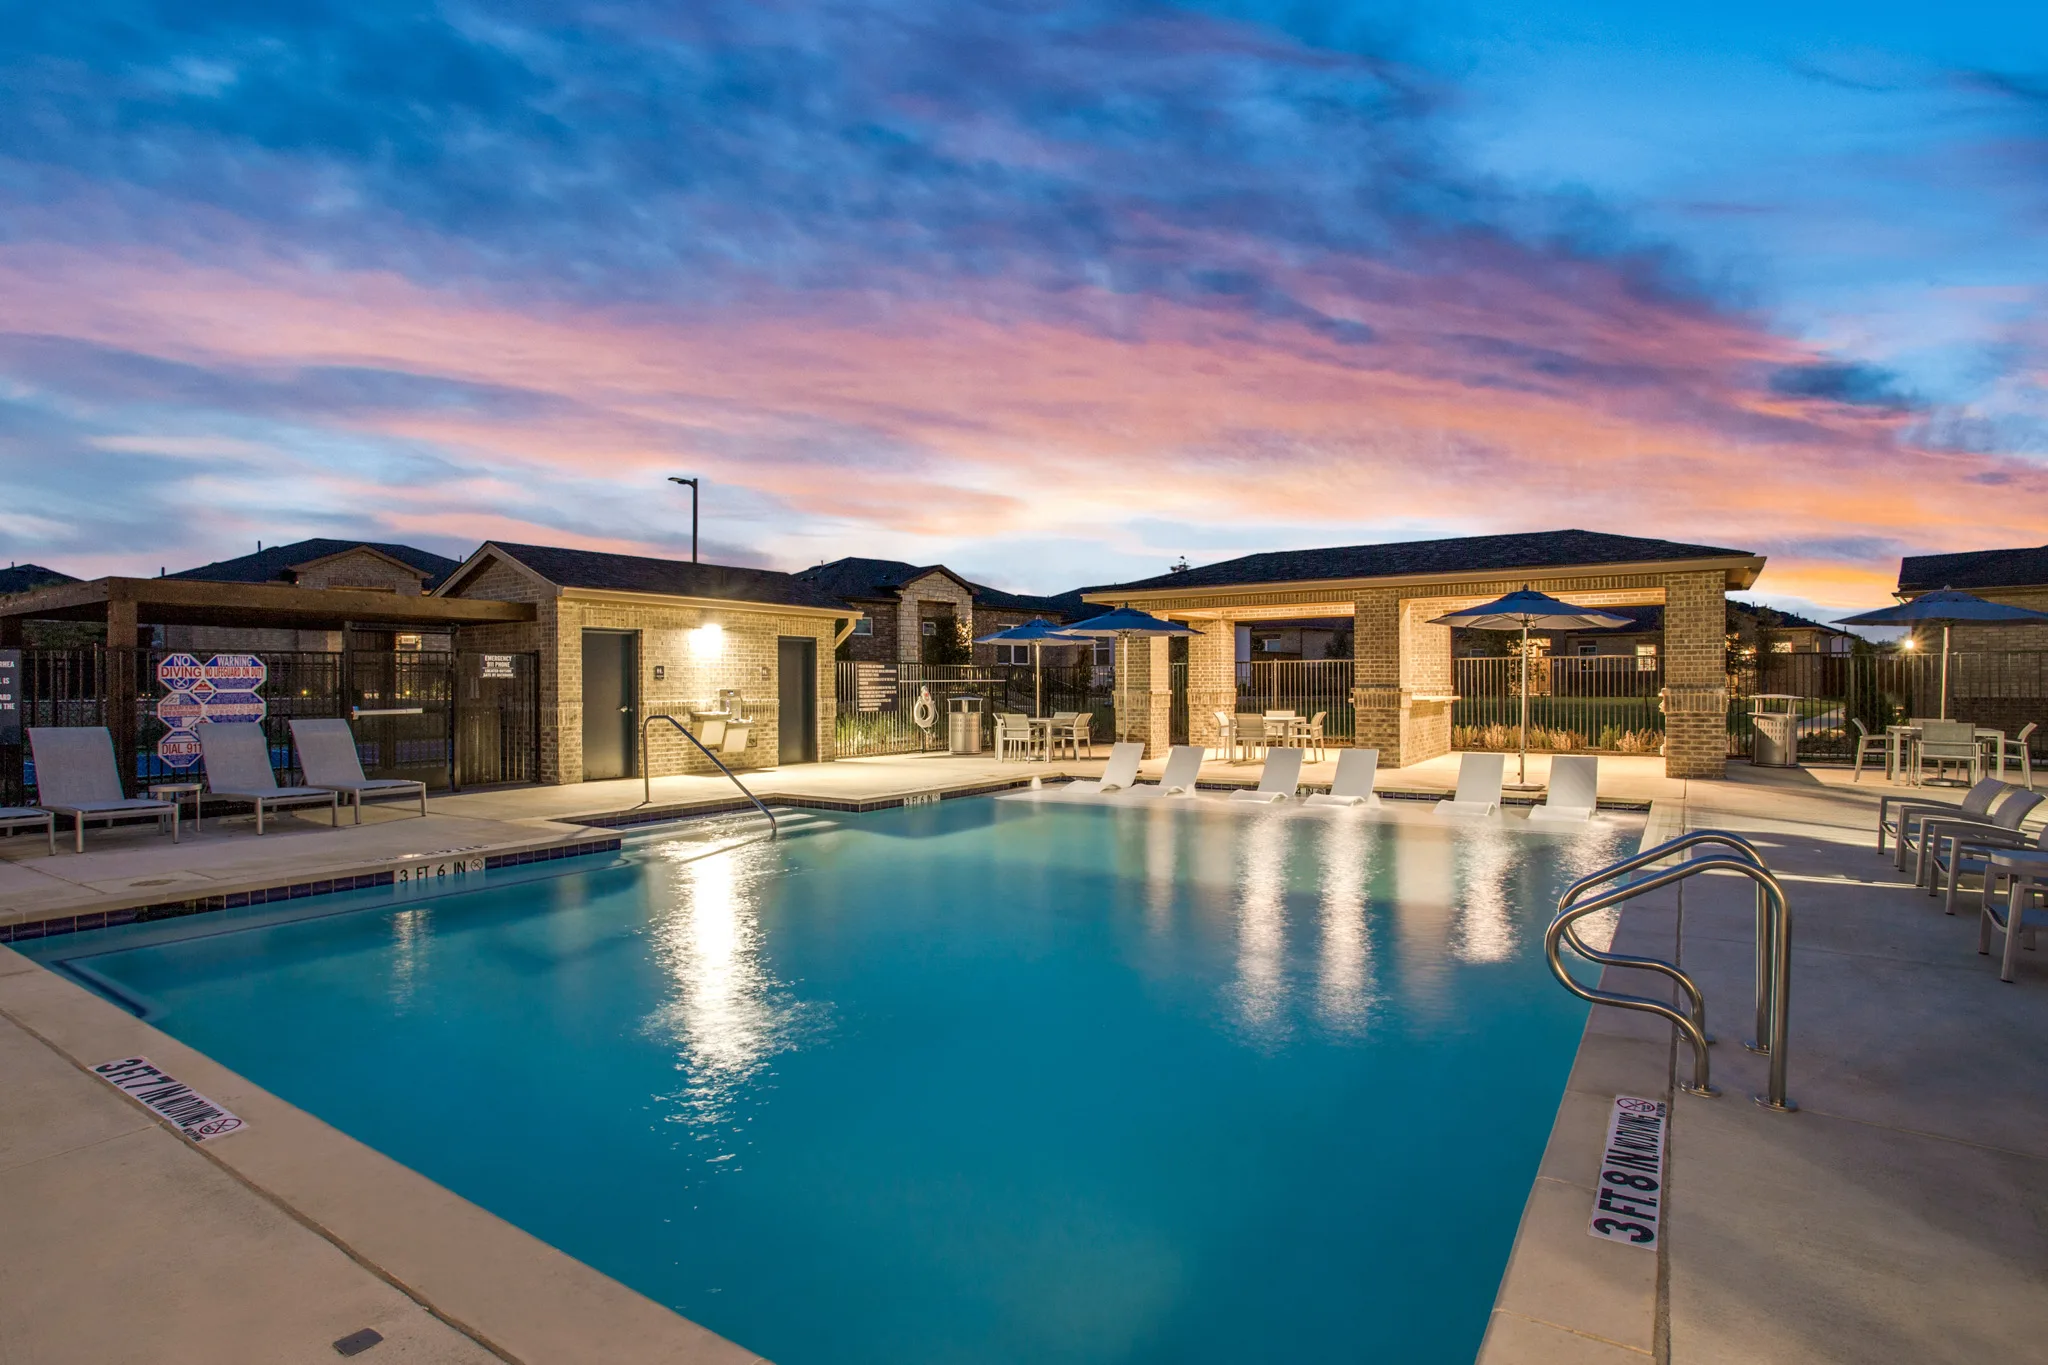 Twilight picture of pool and ramada beside the pool.